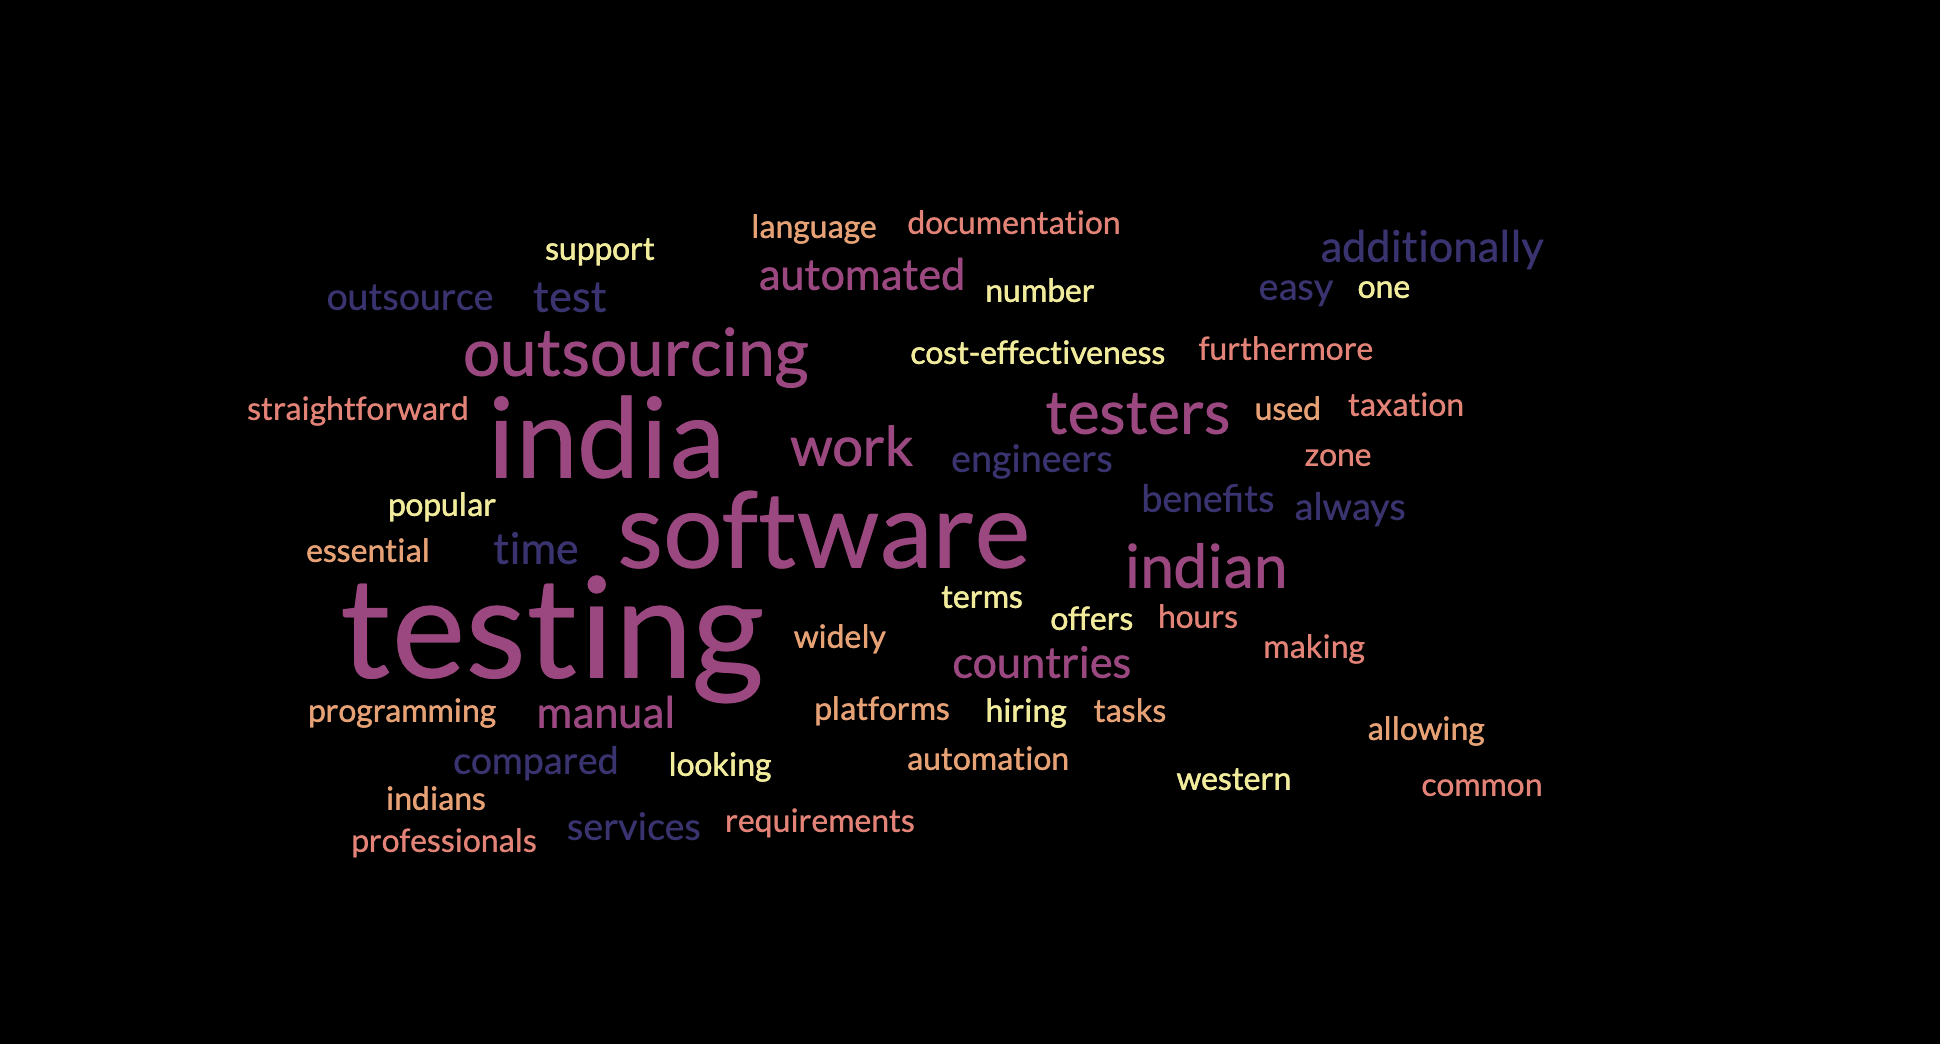  The Benefits of Outsourcing Software Testing to India